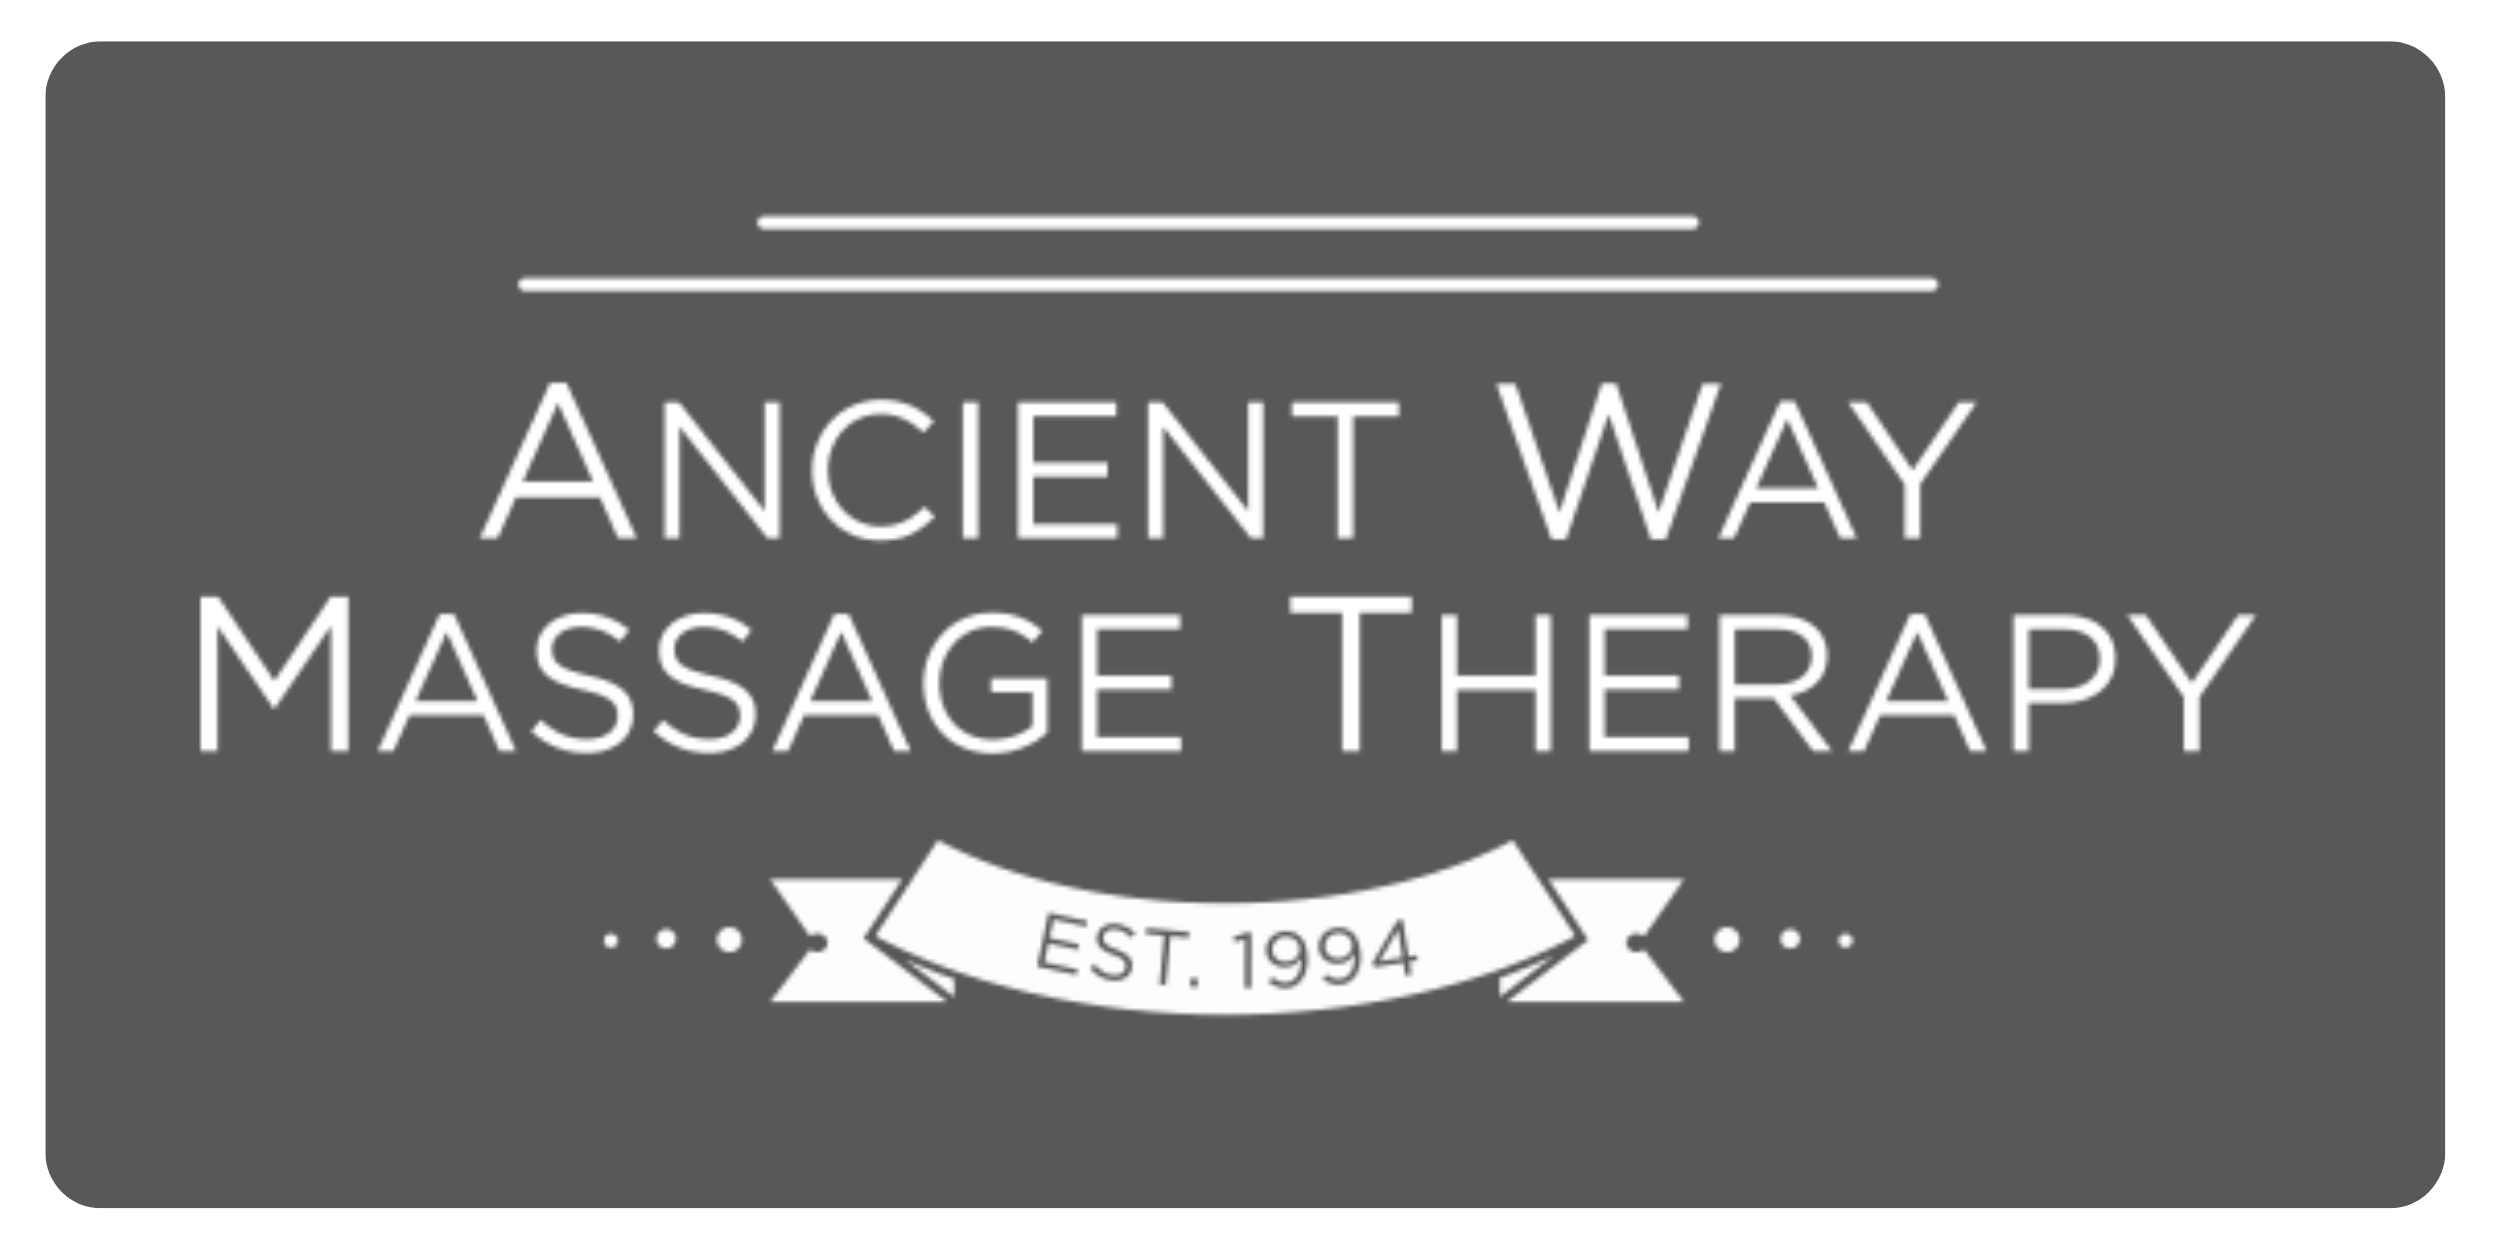 The Ancient Way Registered Massage Therapy